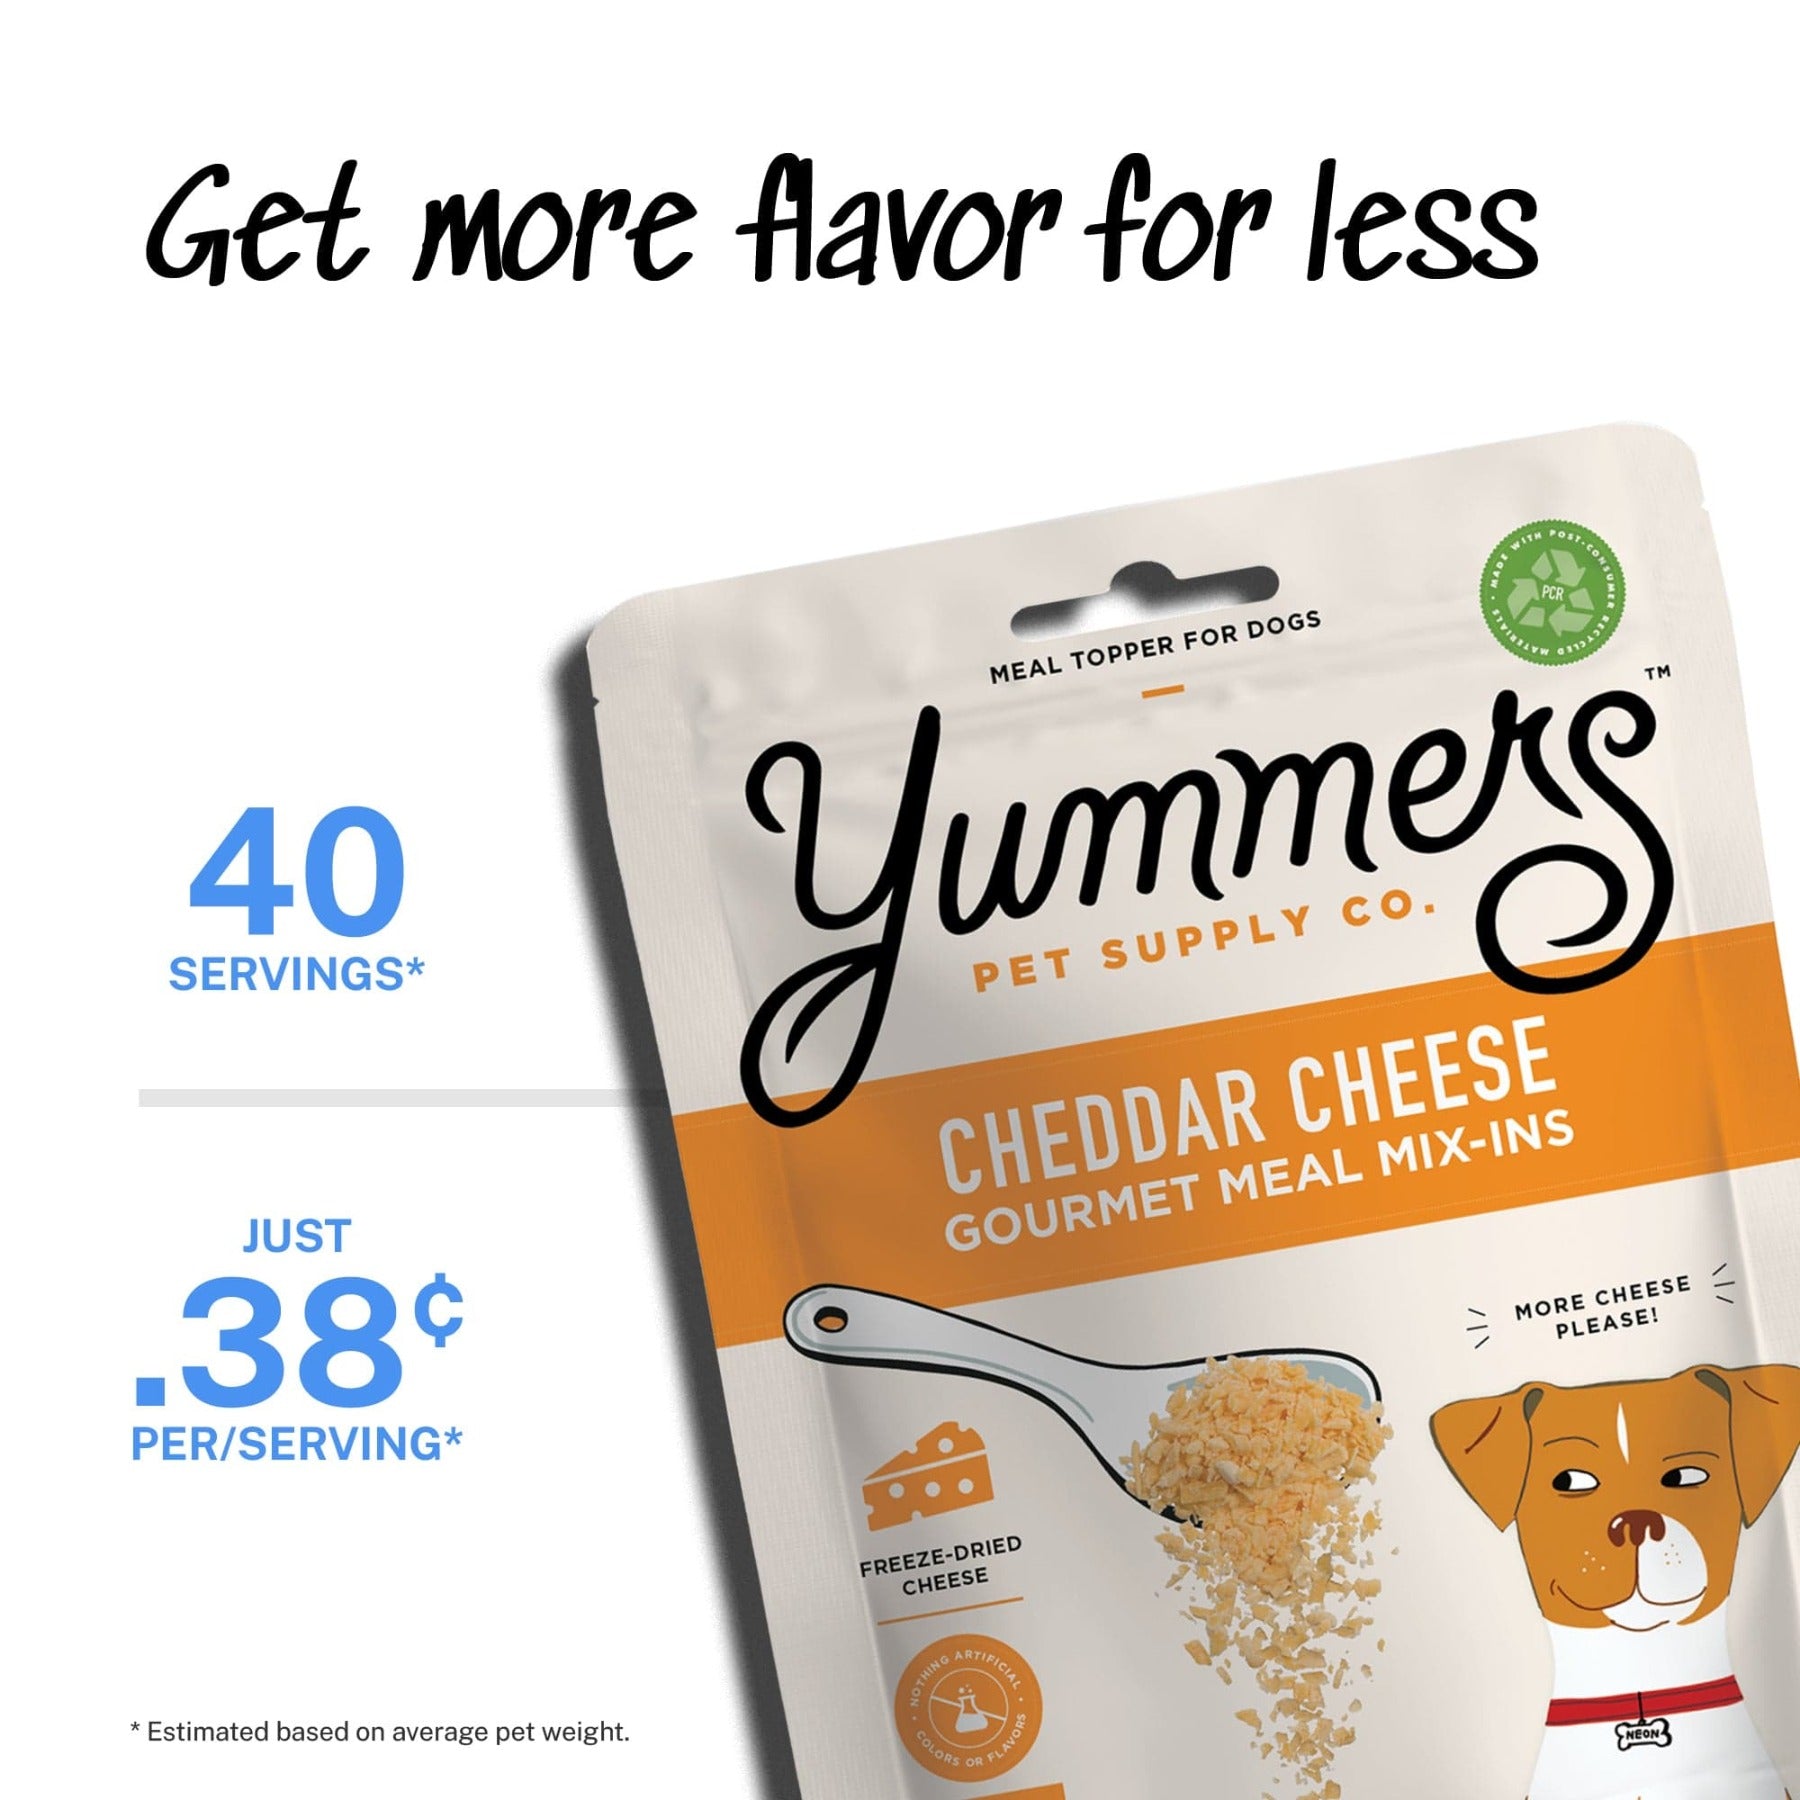 Get more flavor for less - 40 servings - just 38 cents per serving